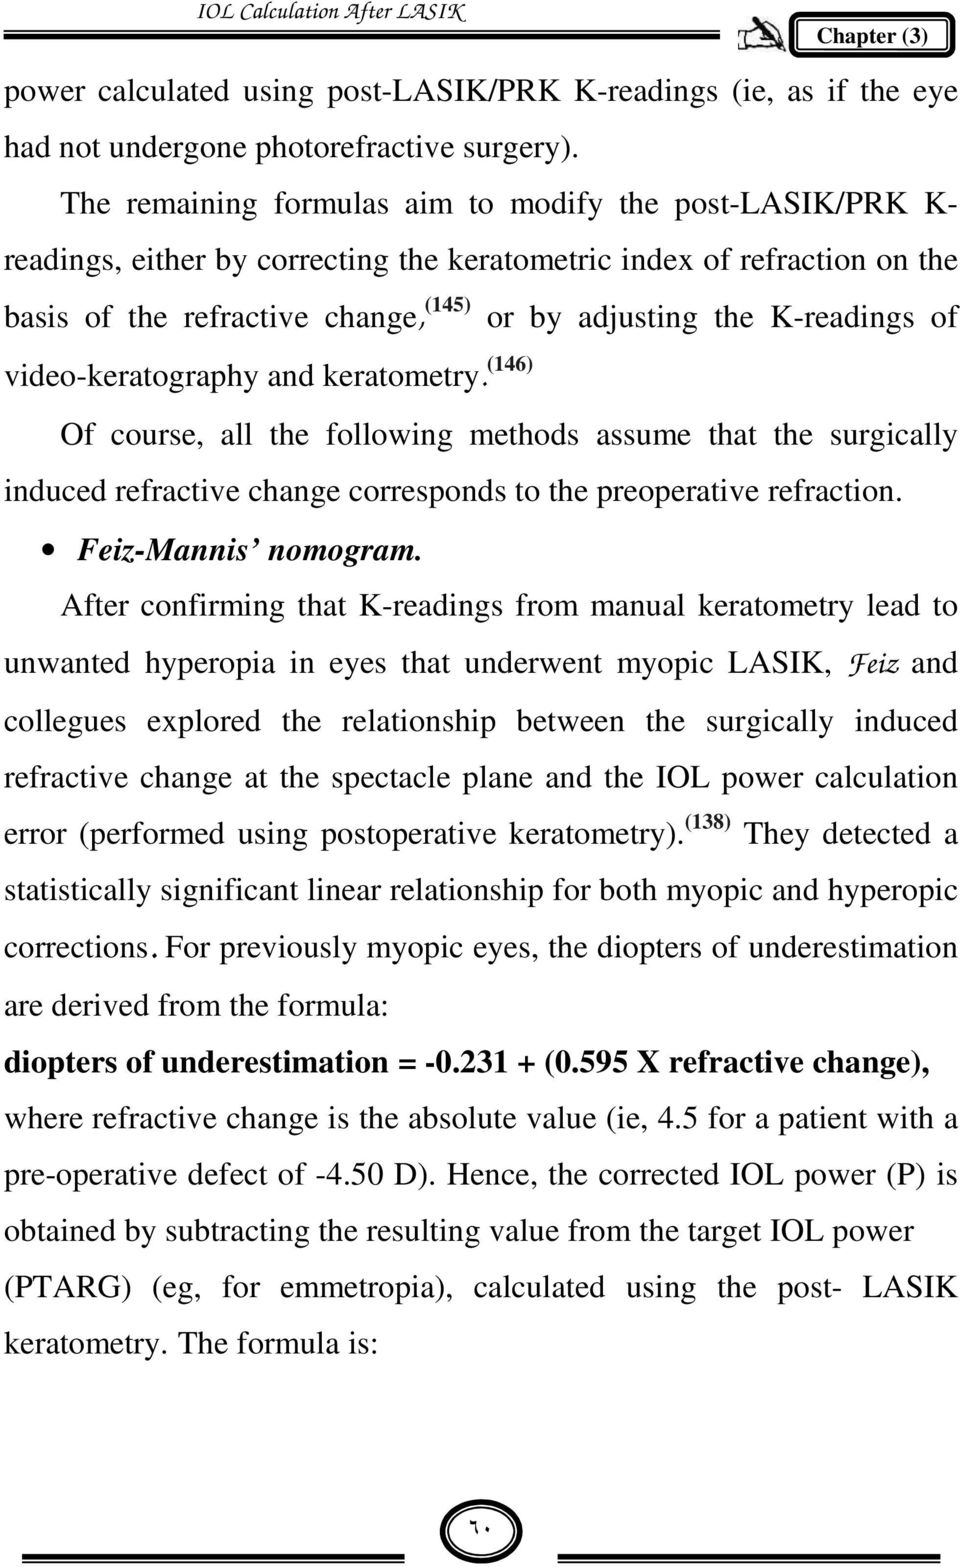 K-readings of video-keratography and keratometry. (146) Of course, all the following methods assume that the surgically induced refractive change corresponds to the preoperative refraction.